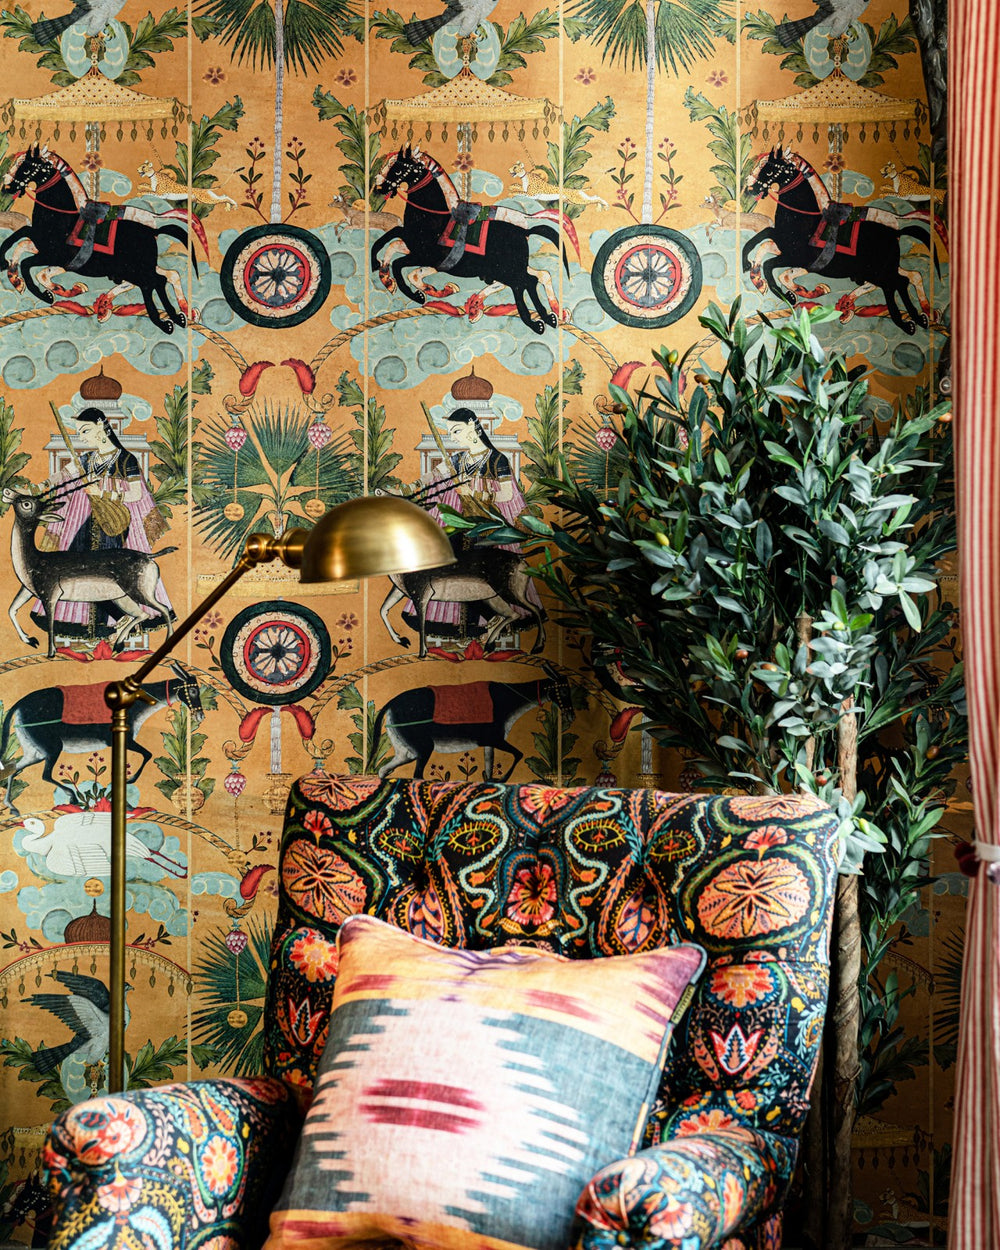 Mind-the-gap-tales-of-Maghreb-collection-wallpaper-Yennayer-agate-print-pracing-horses-decorations-birds-beasts-carnival-wallpaper-print-Indian-Themed-